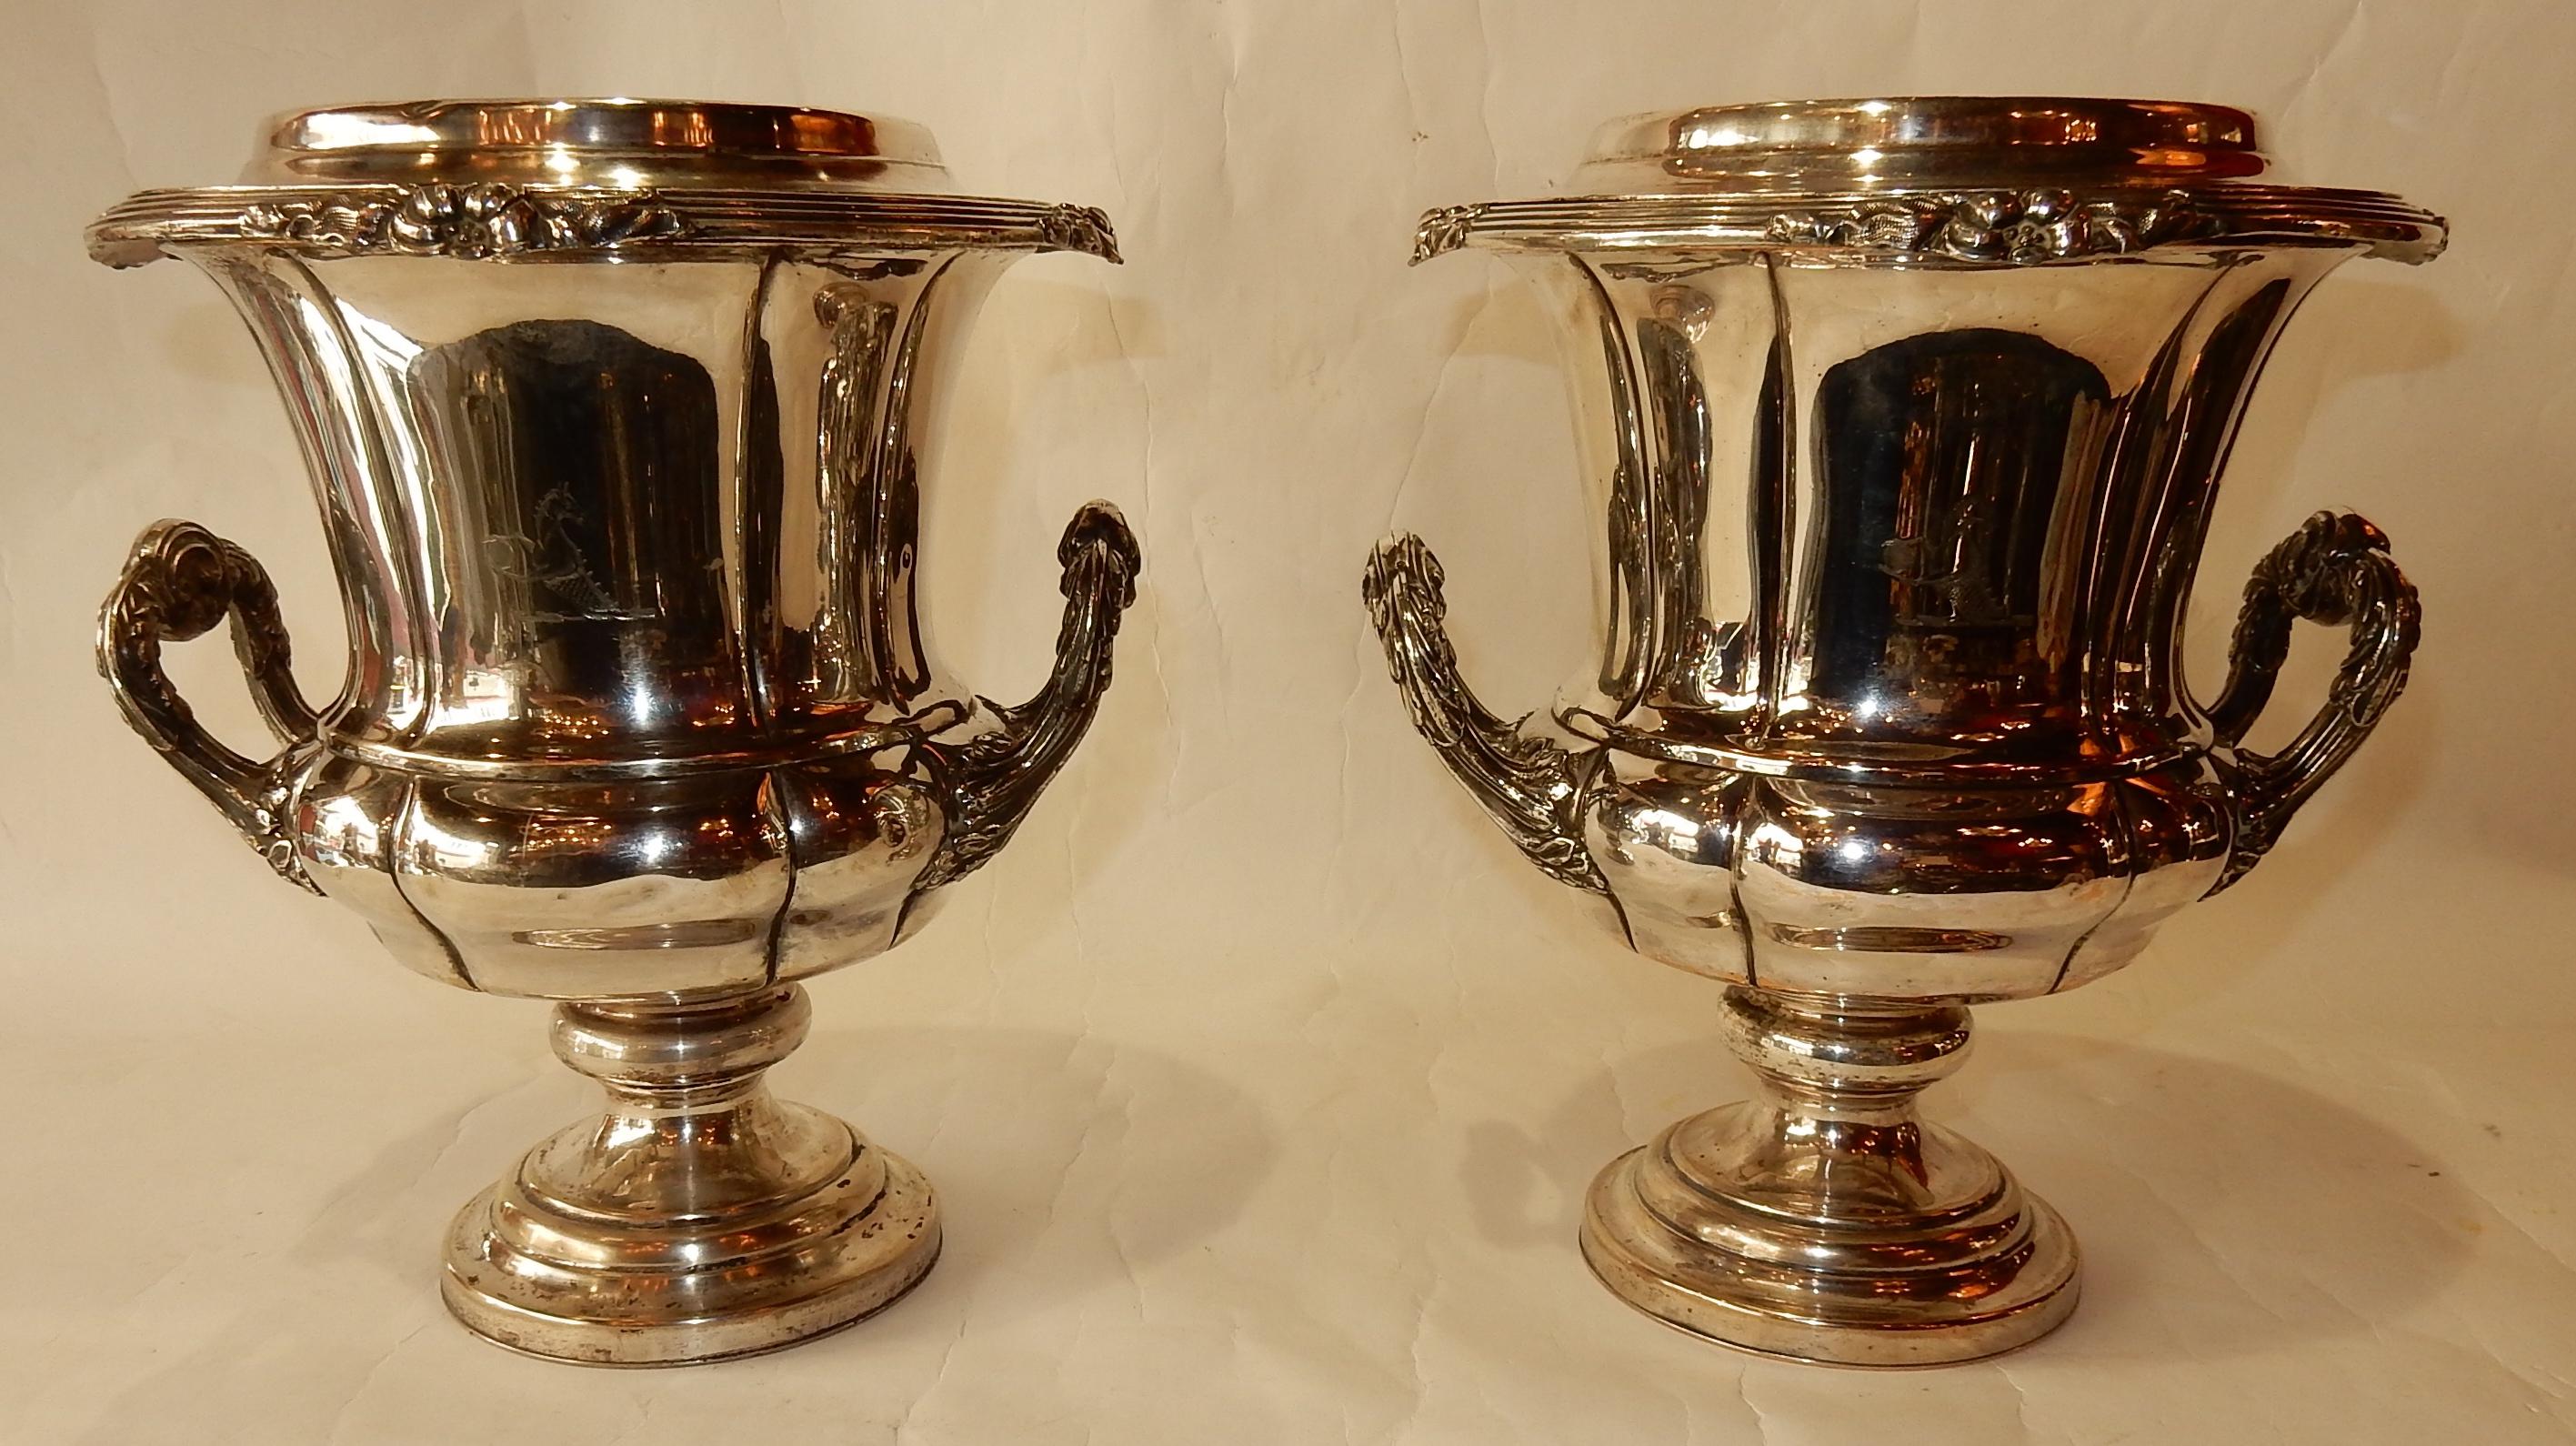 1900 Pair of Silver Metal Refreshers in the Style of Napoleon 3 For Sale 5